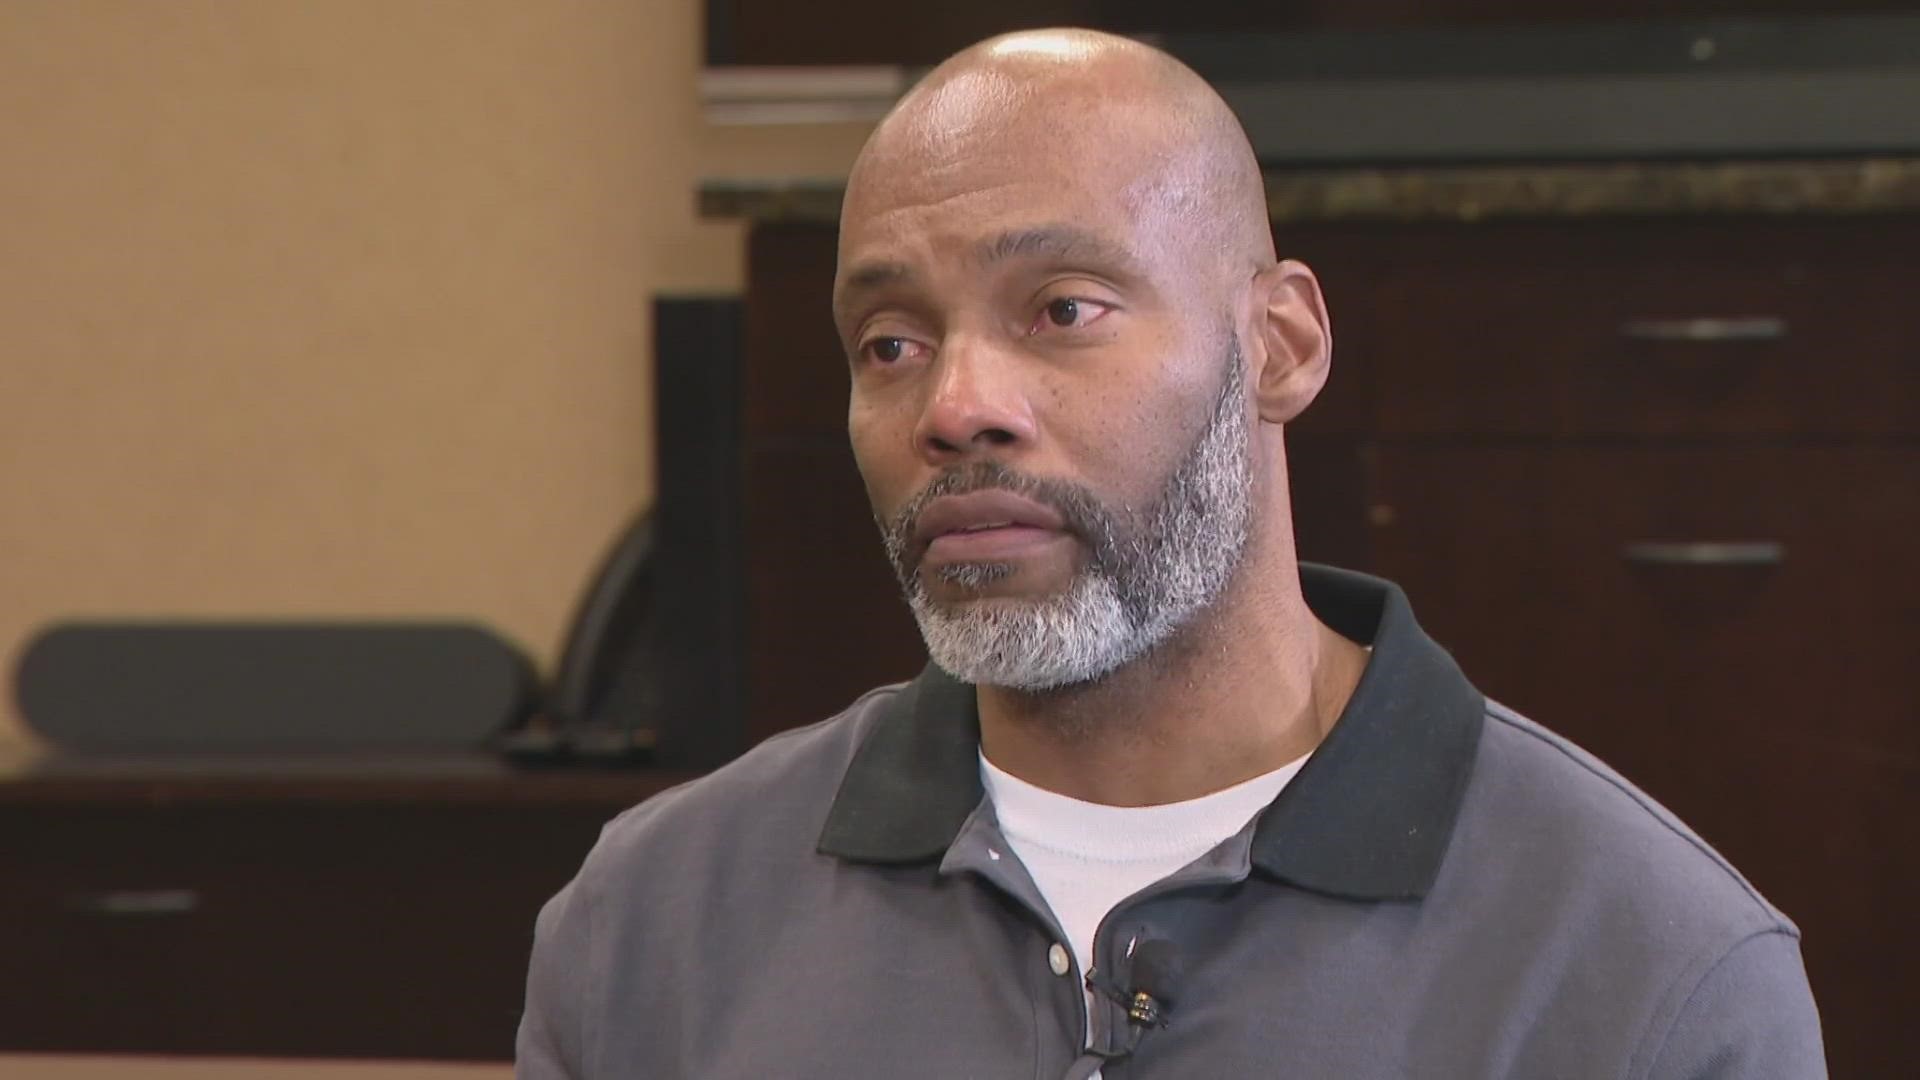 A judge threw out Lamar Johnson's murder conviction this week after nearly 28 years.